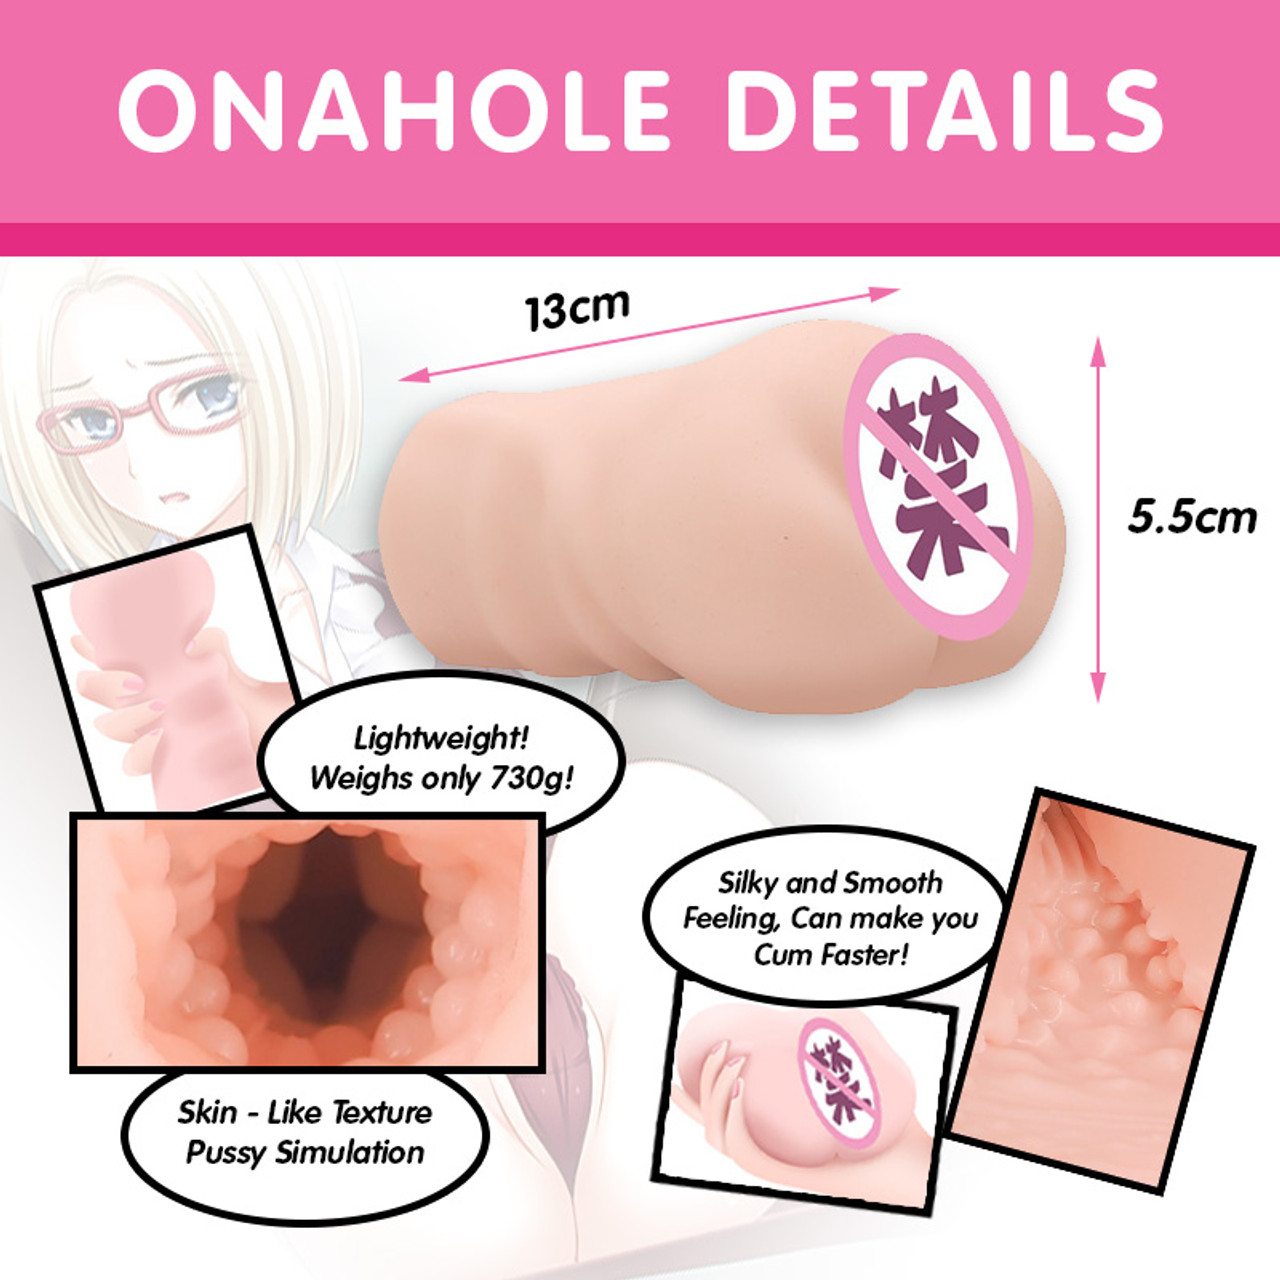 andrei dumitriu recommends How To Use A Onahole